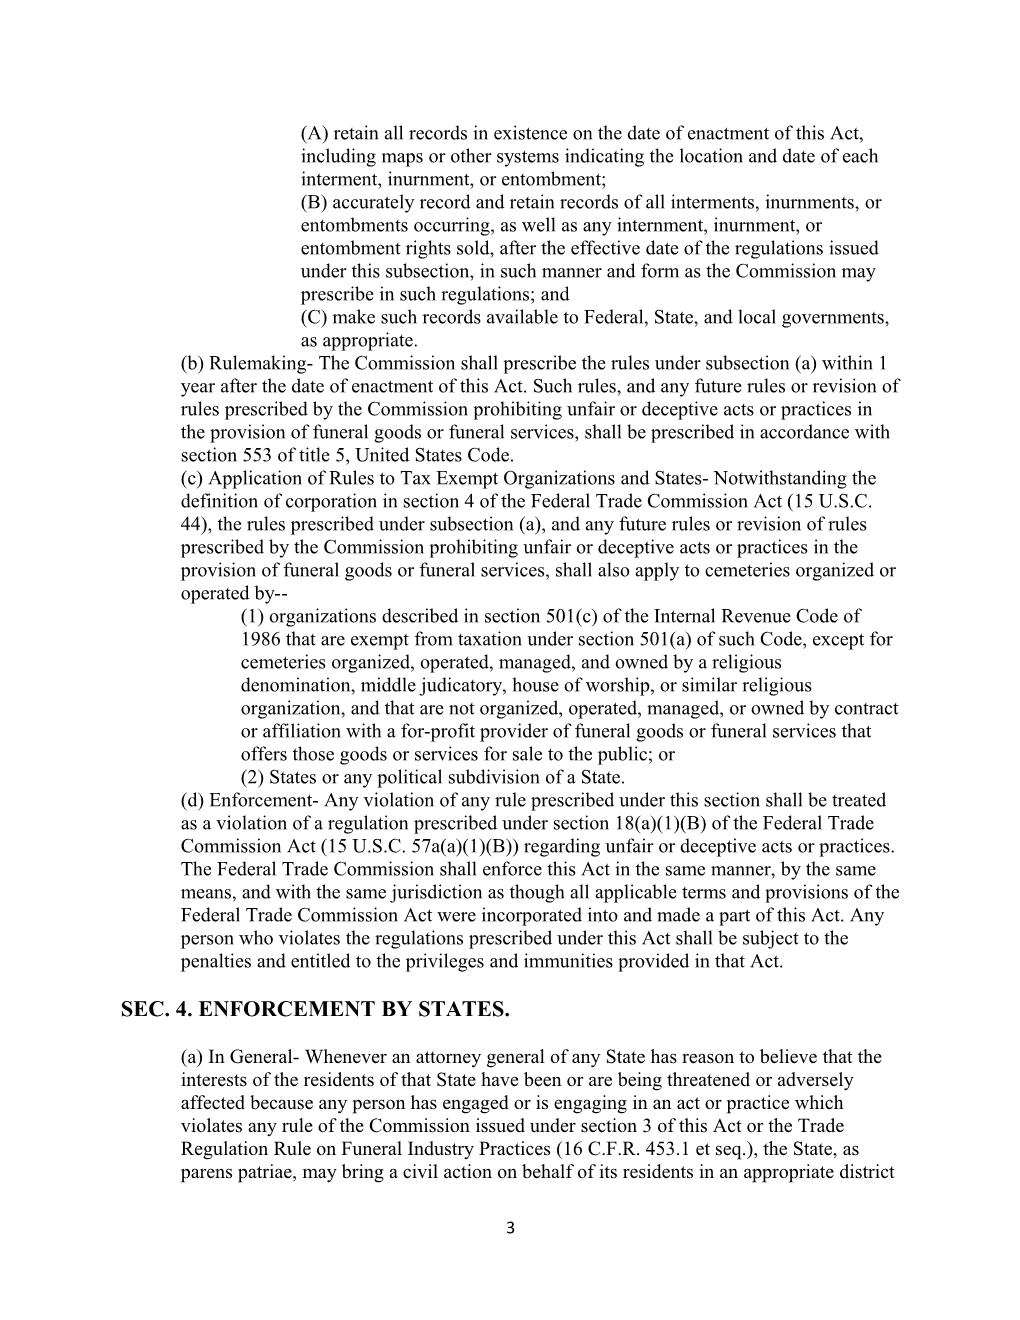 H.R.900 Bereaved Consumer's Bill of Rights Act of 2011 (Introduced in House - IH)